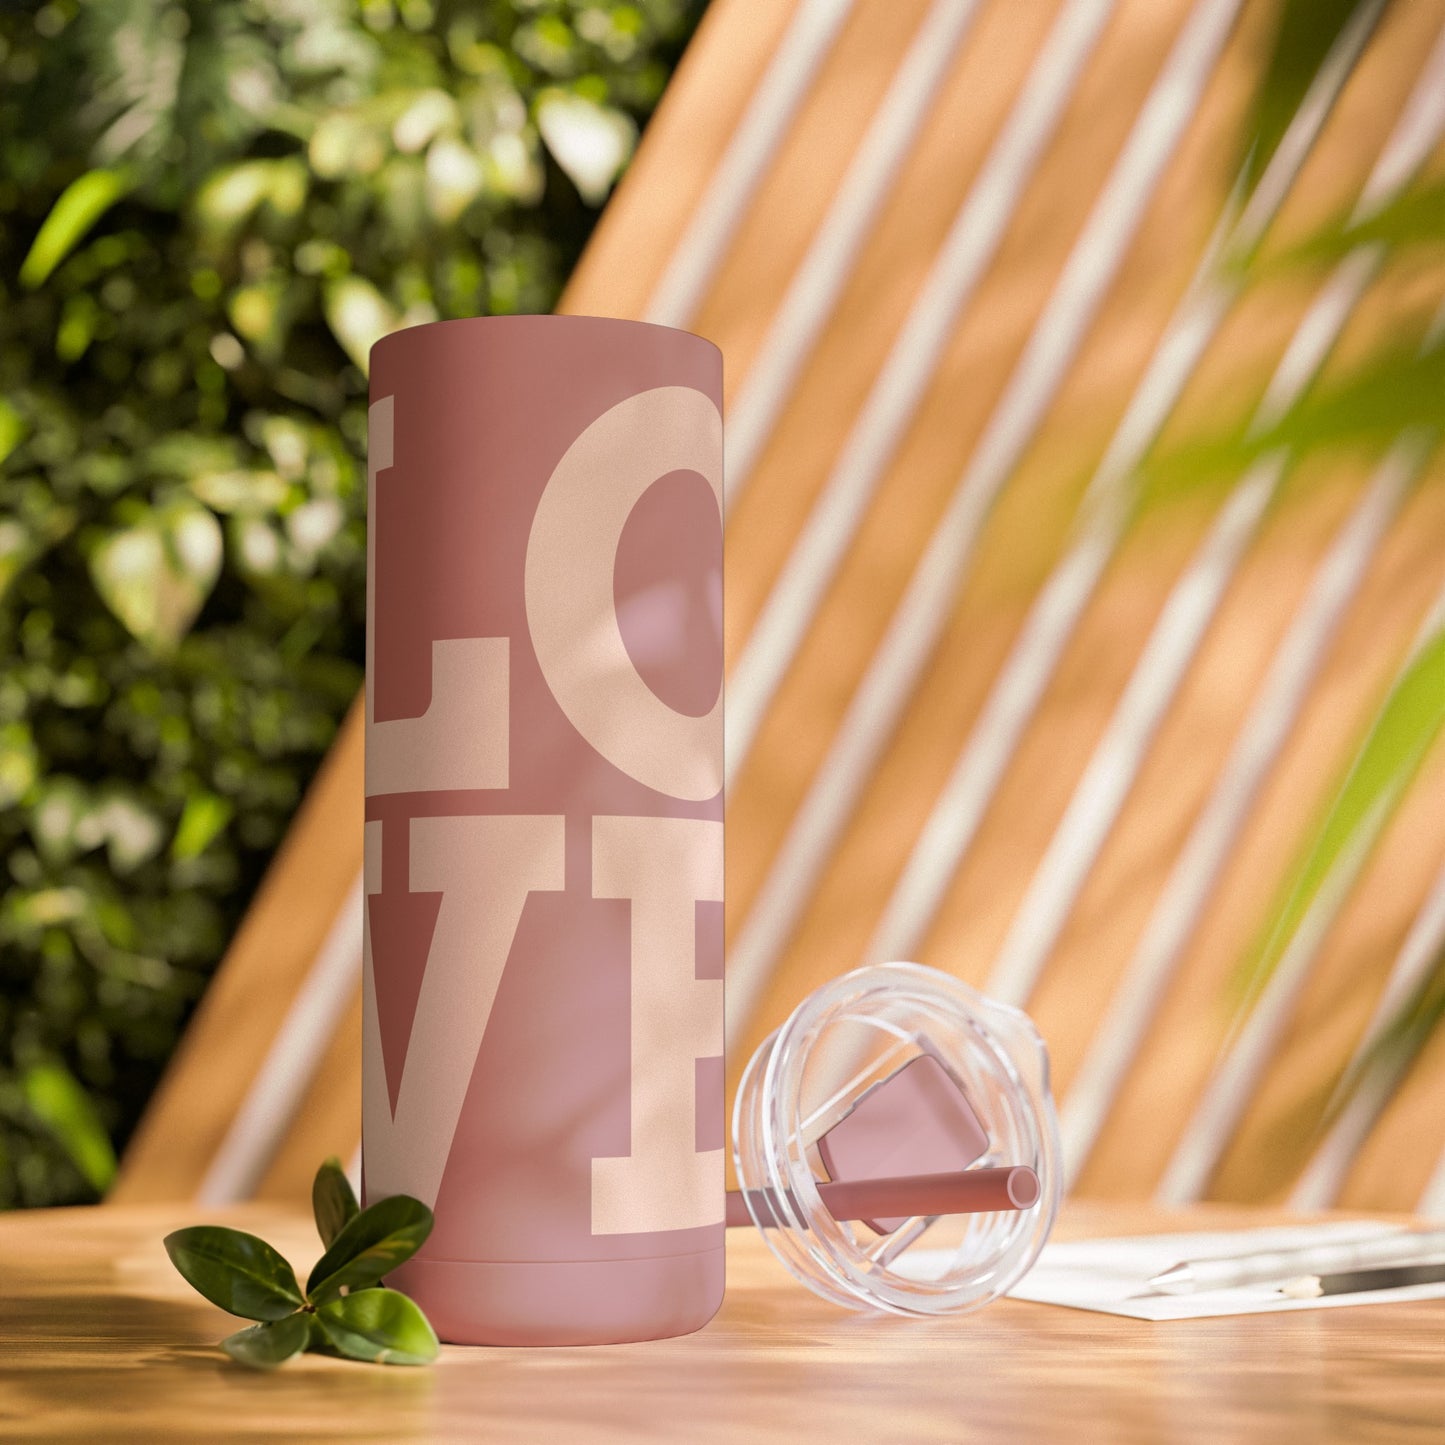 BIG LOVE - 20 oz Tumbler - Maars Maker: Stylish Stainless Steel, 24-Hour Cold, 12-Hour Hot